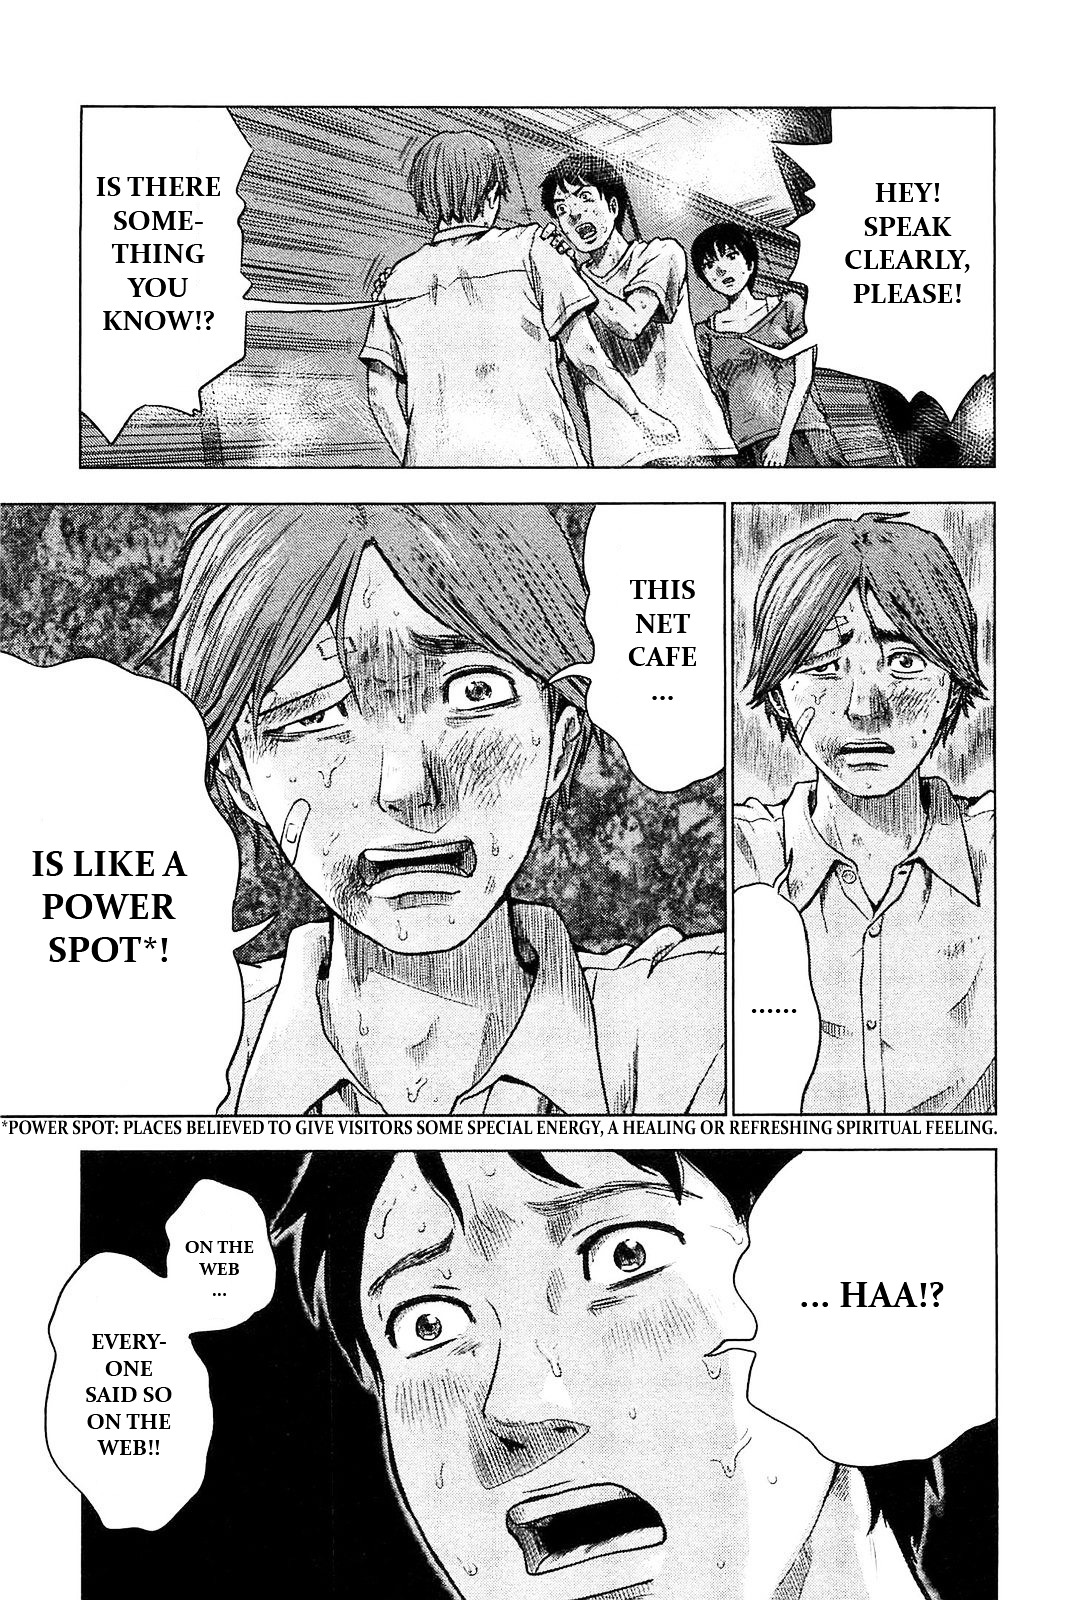 Hyouryuu Net Cafe Vol.1 Chapter 7 : Power Spot - Picture 3